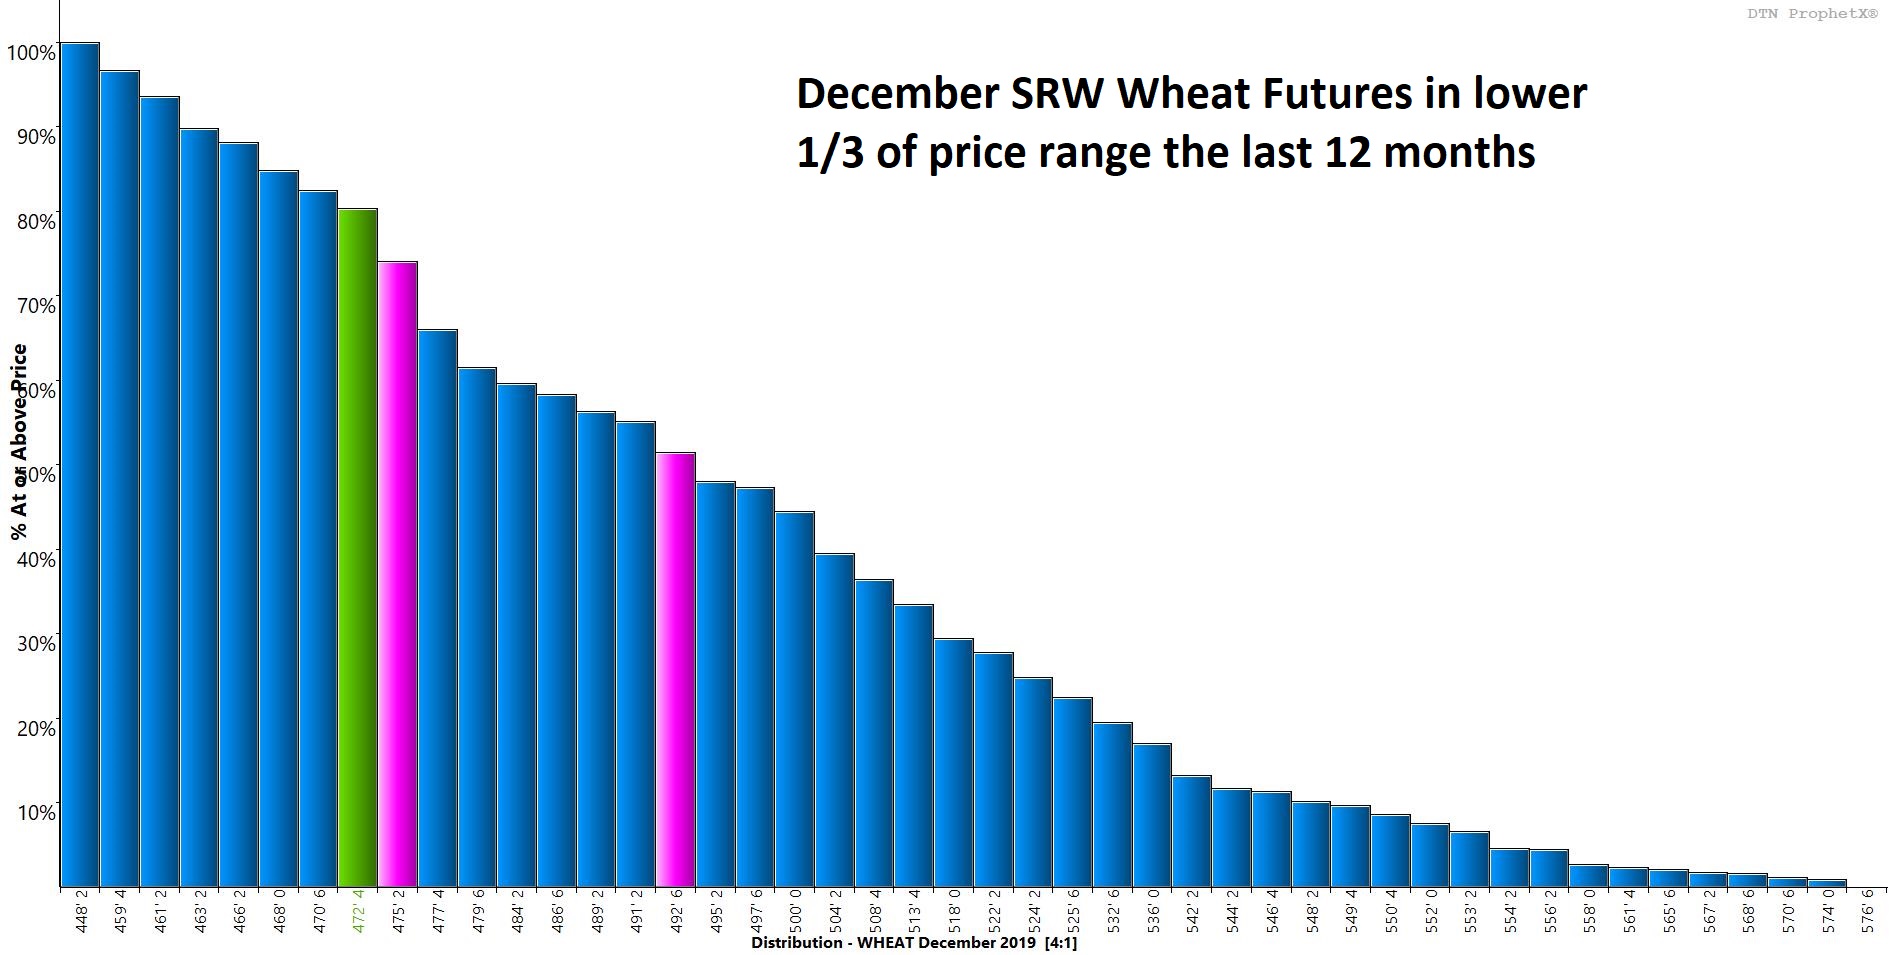 Wheat Technical Outlook